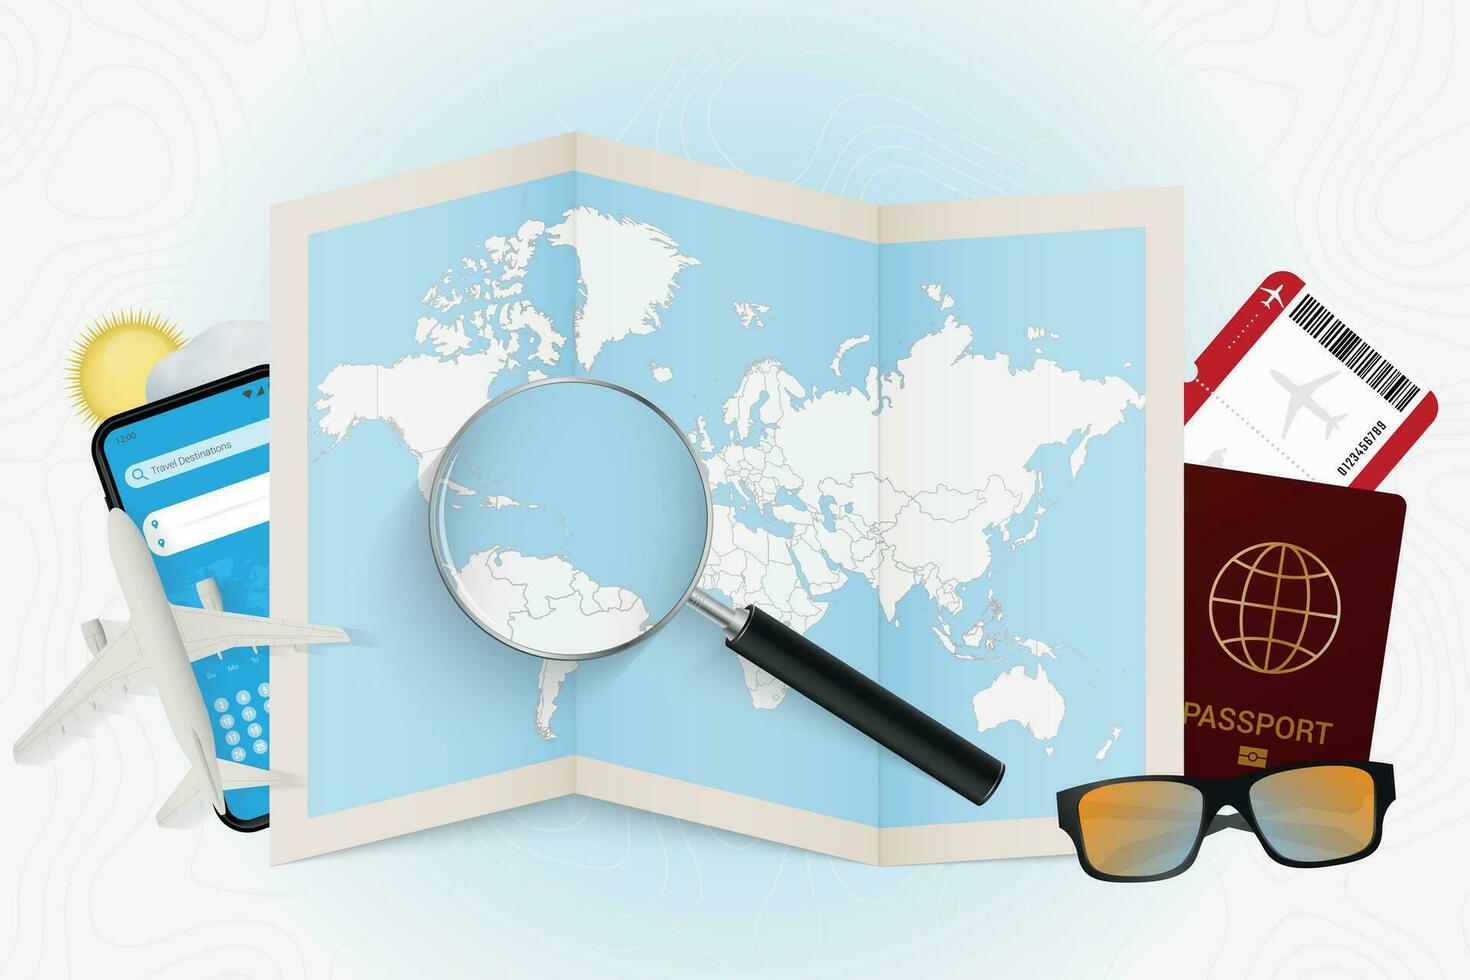 Travel destination Saint Kitts and Nevis, tourism mockup with travel equipment and world map with magnifying glass on a Saint Kitts and Nevis. vector